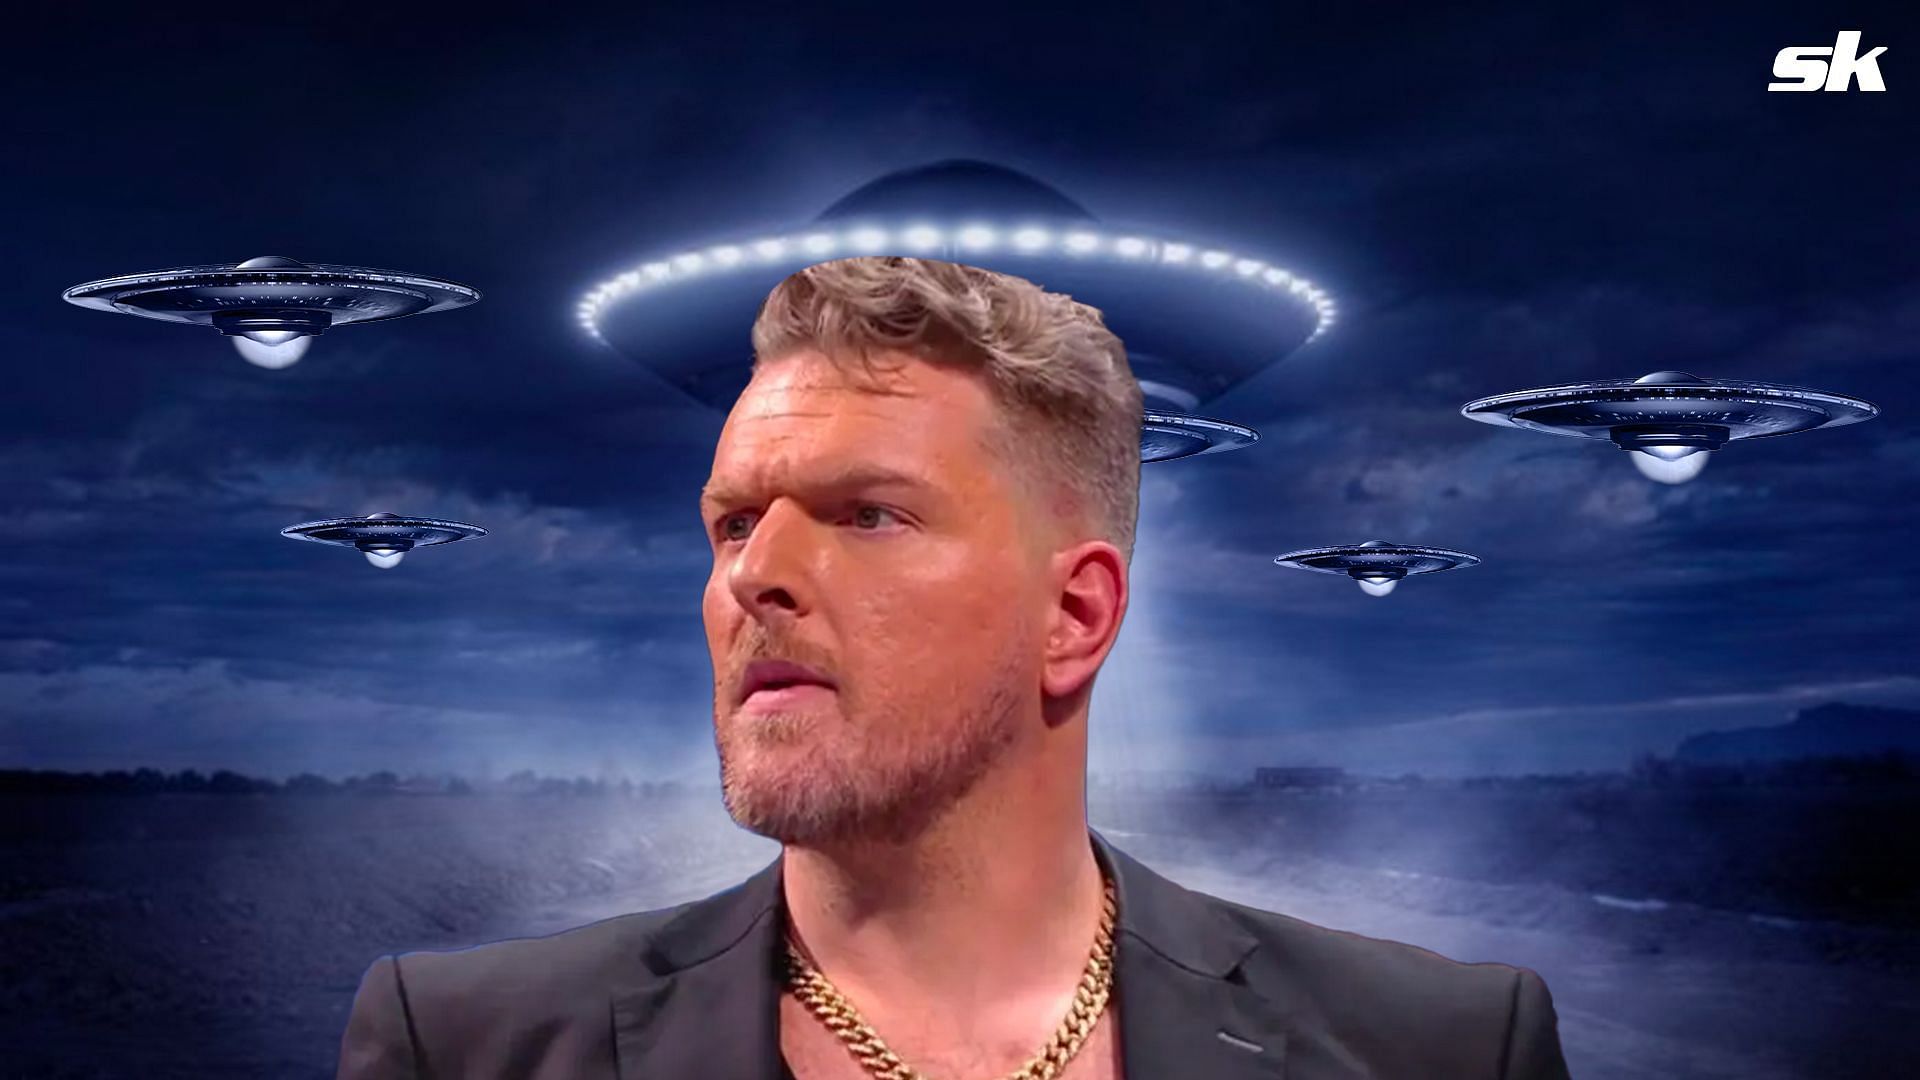 McAfee has given his thoughts on the recent UFO developments.